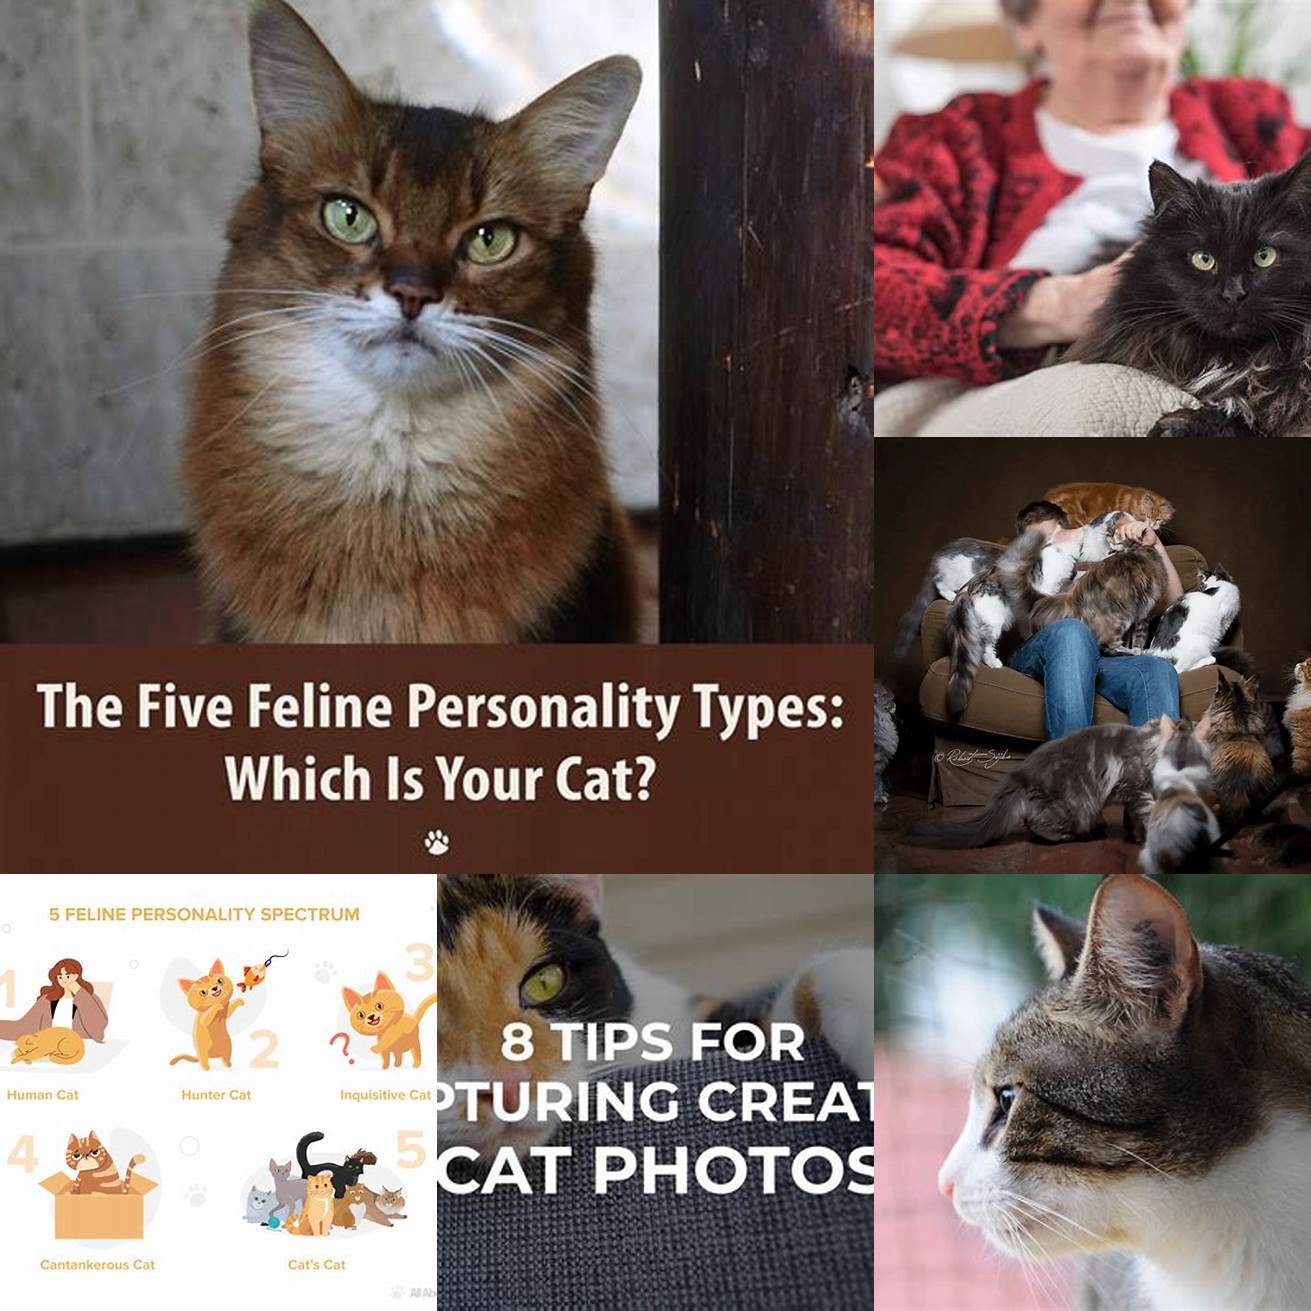 Capturing the cats personality and beauty